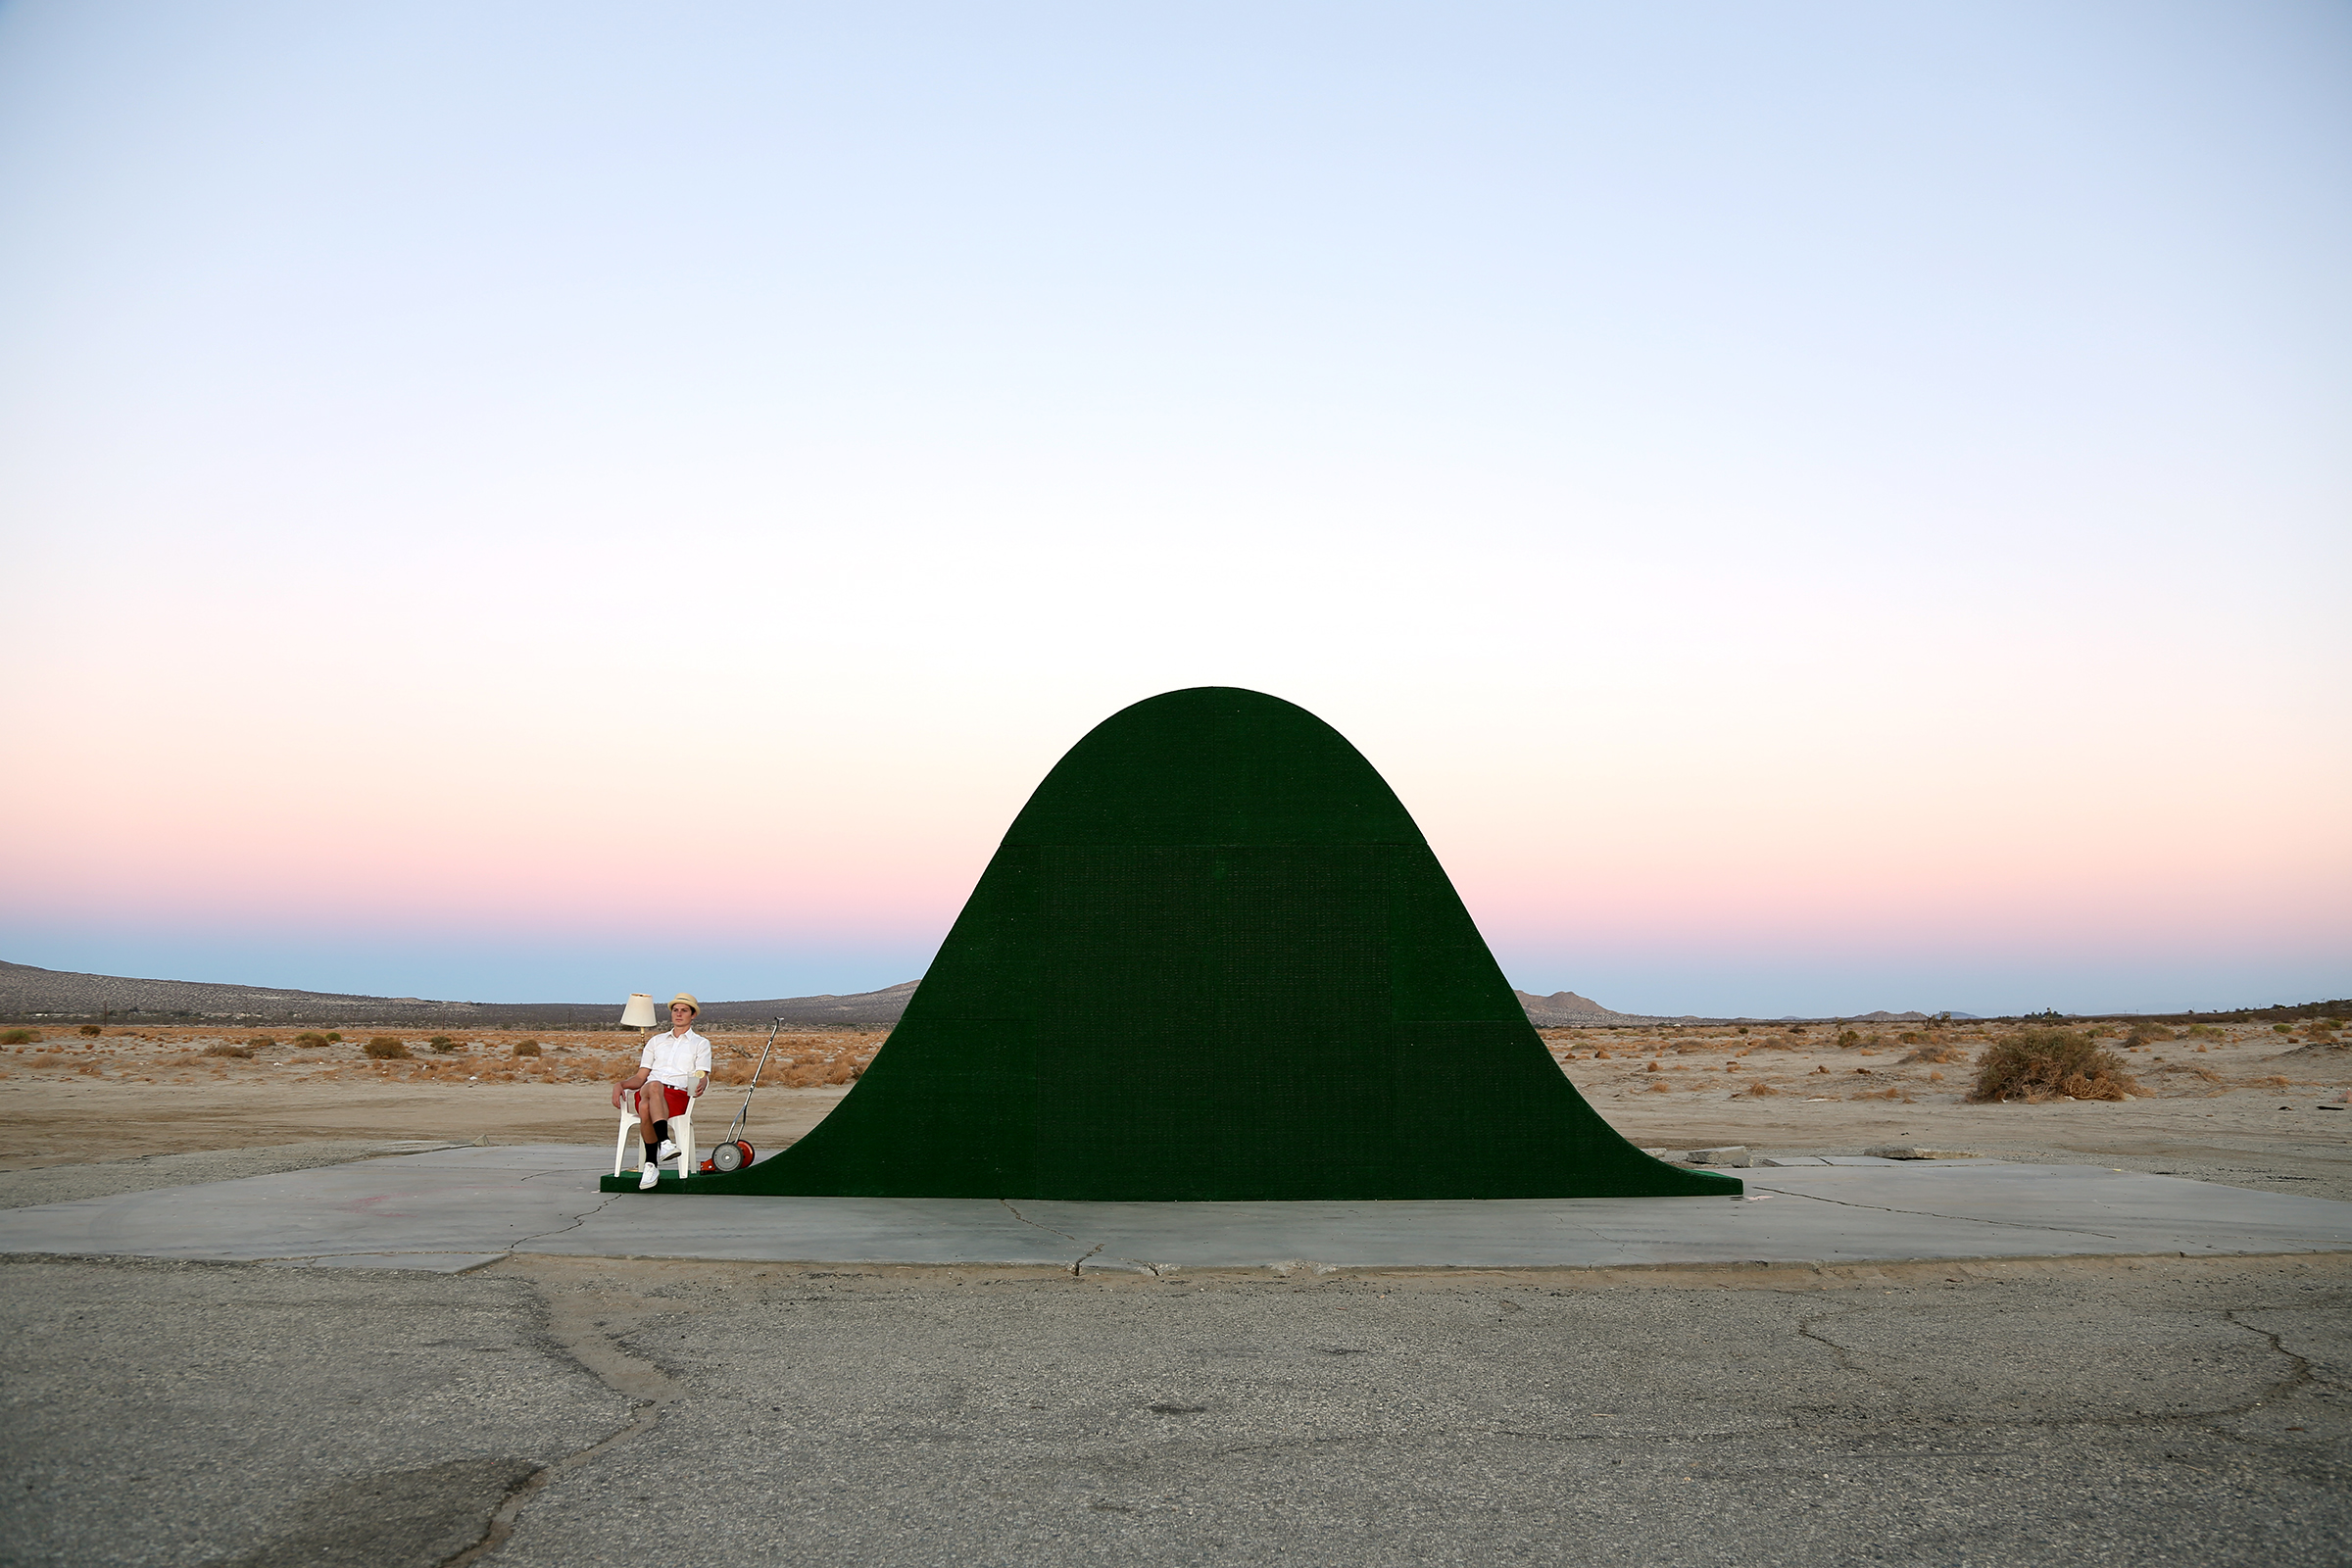 A person sits next to a large bell-curve shaped mound of artificial turf in the middle of desert.